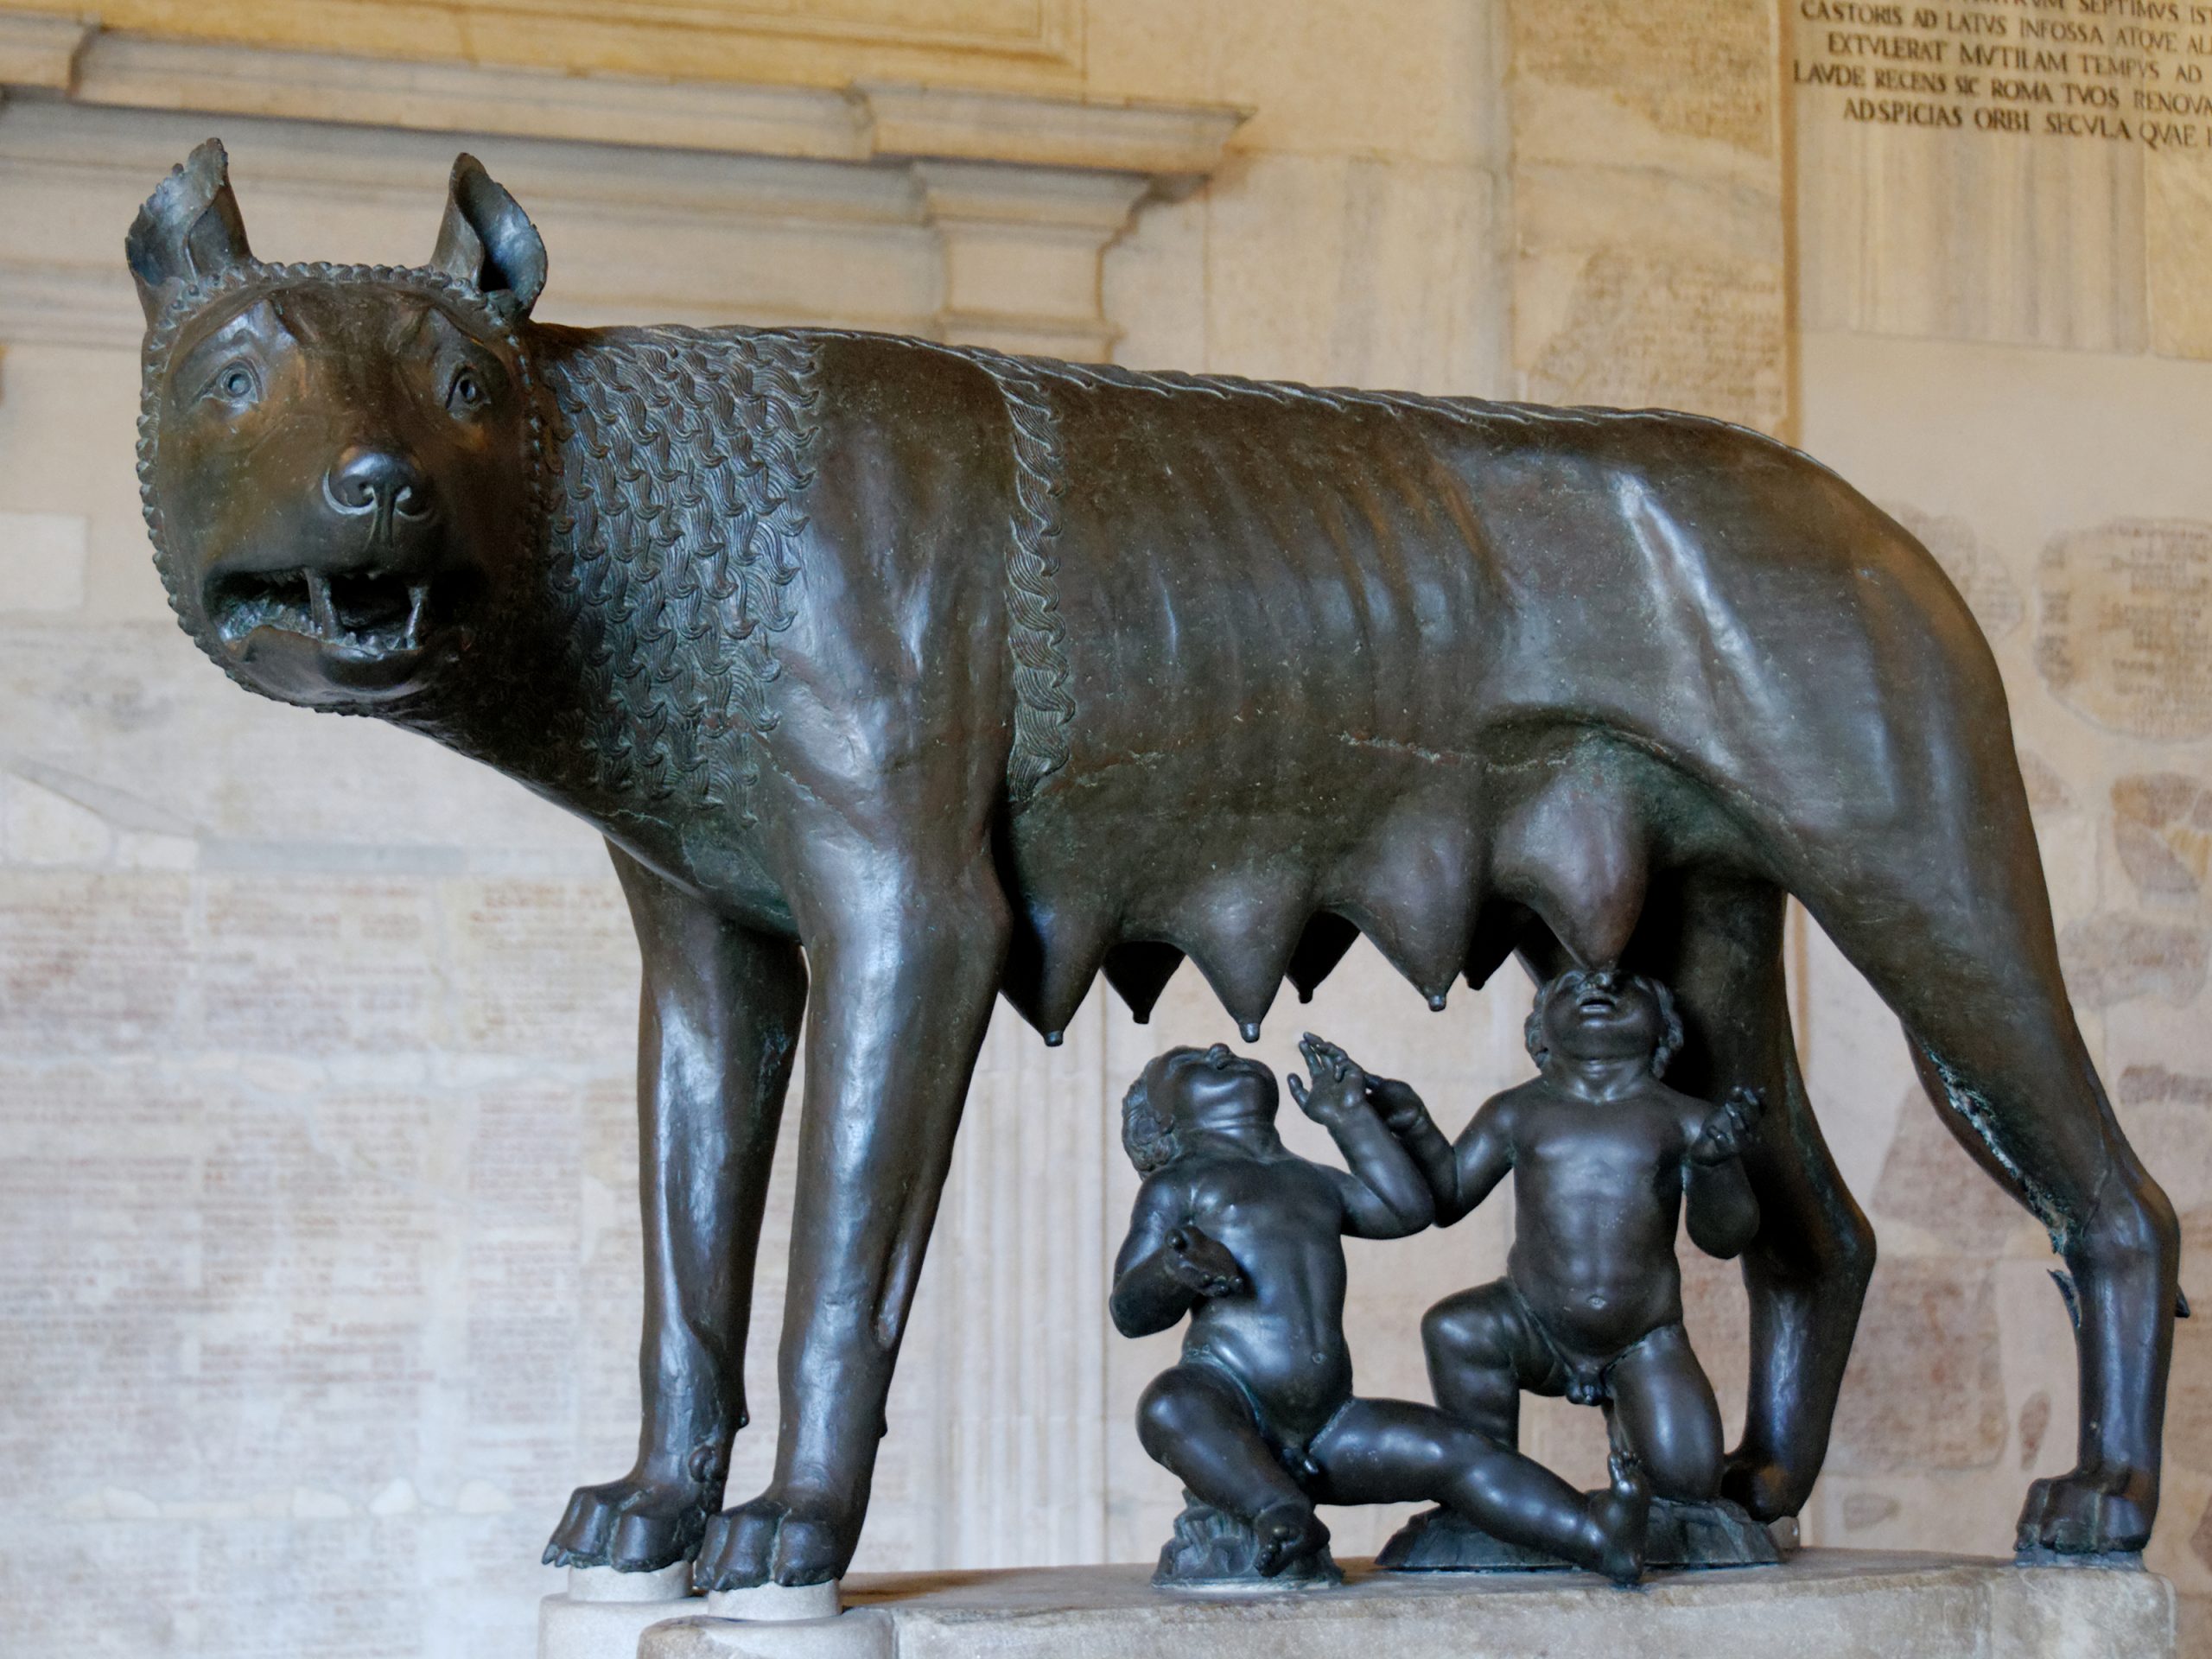 She-wolf symbol of Rome with Romulus and Remus